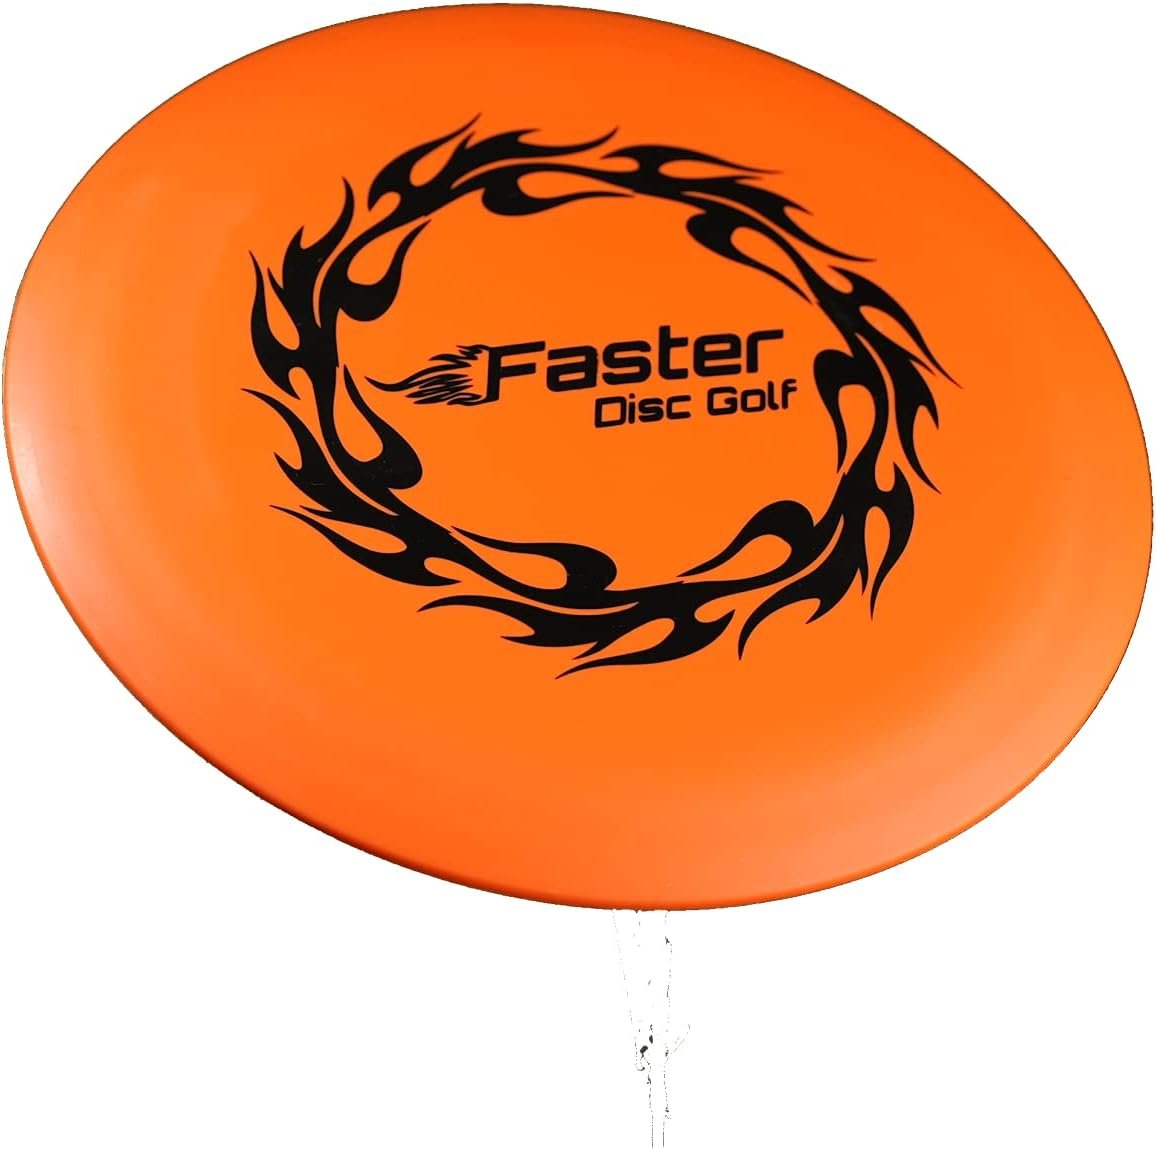 Faster Disc Golf Set. Everything Beginners -Intermediate Golfers Need | 7 Discs: 2 Drivers, 2 Mid-Range, 2 Putters, 1 Marker + Quality Carrying Bag with a Water Bottle Pocket